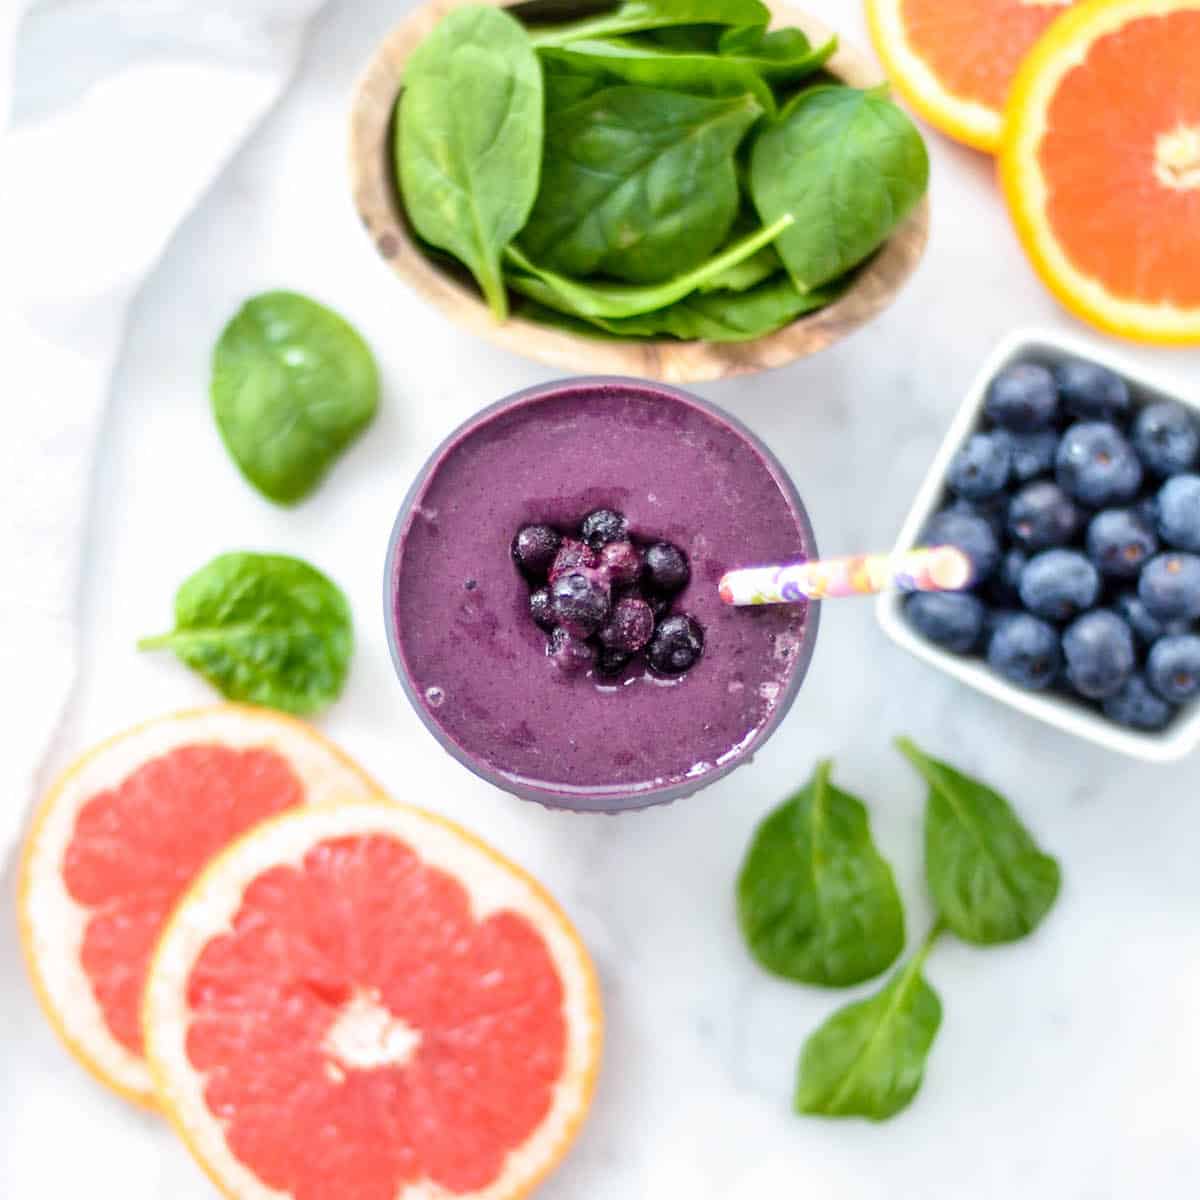 Overhead view of a Blueberry Citrus Smoothie with Spinach